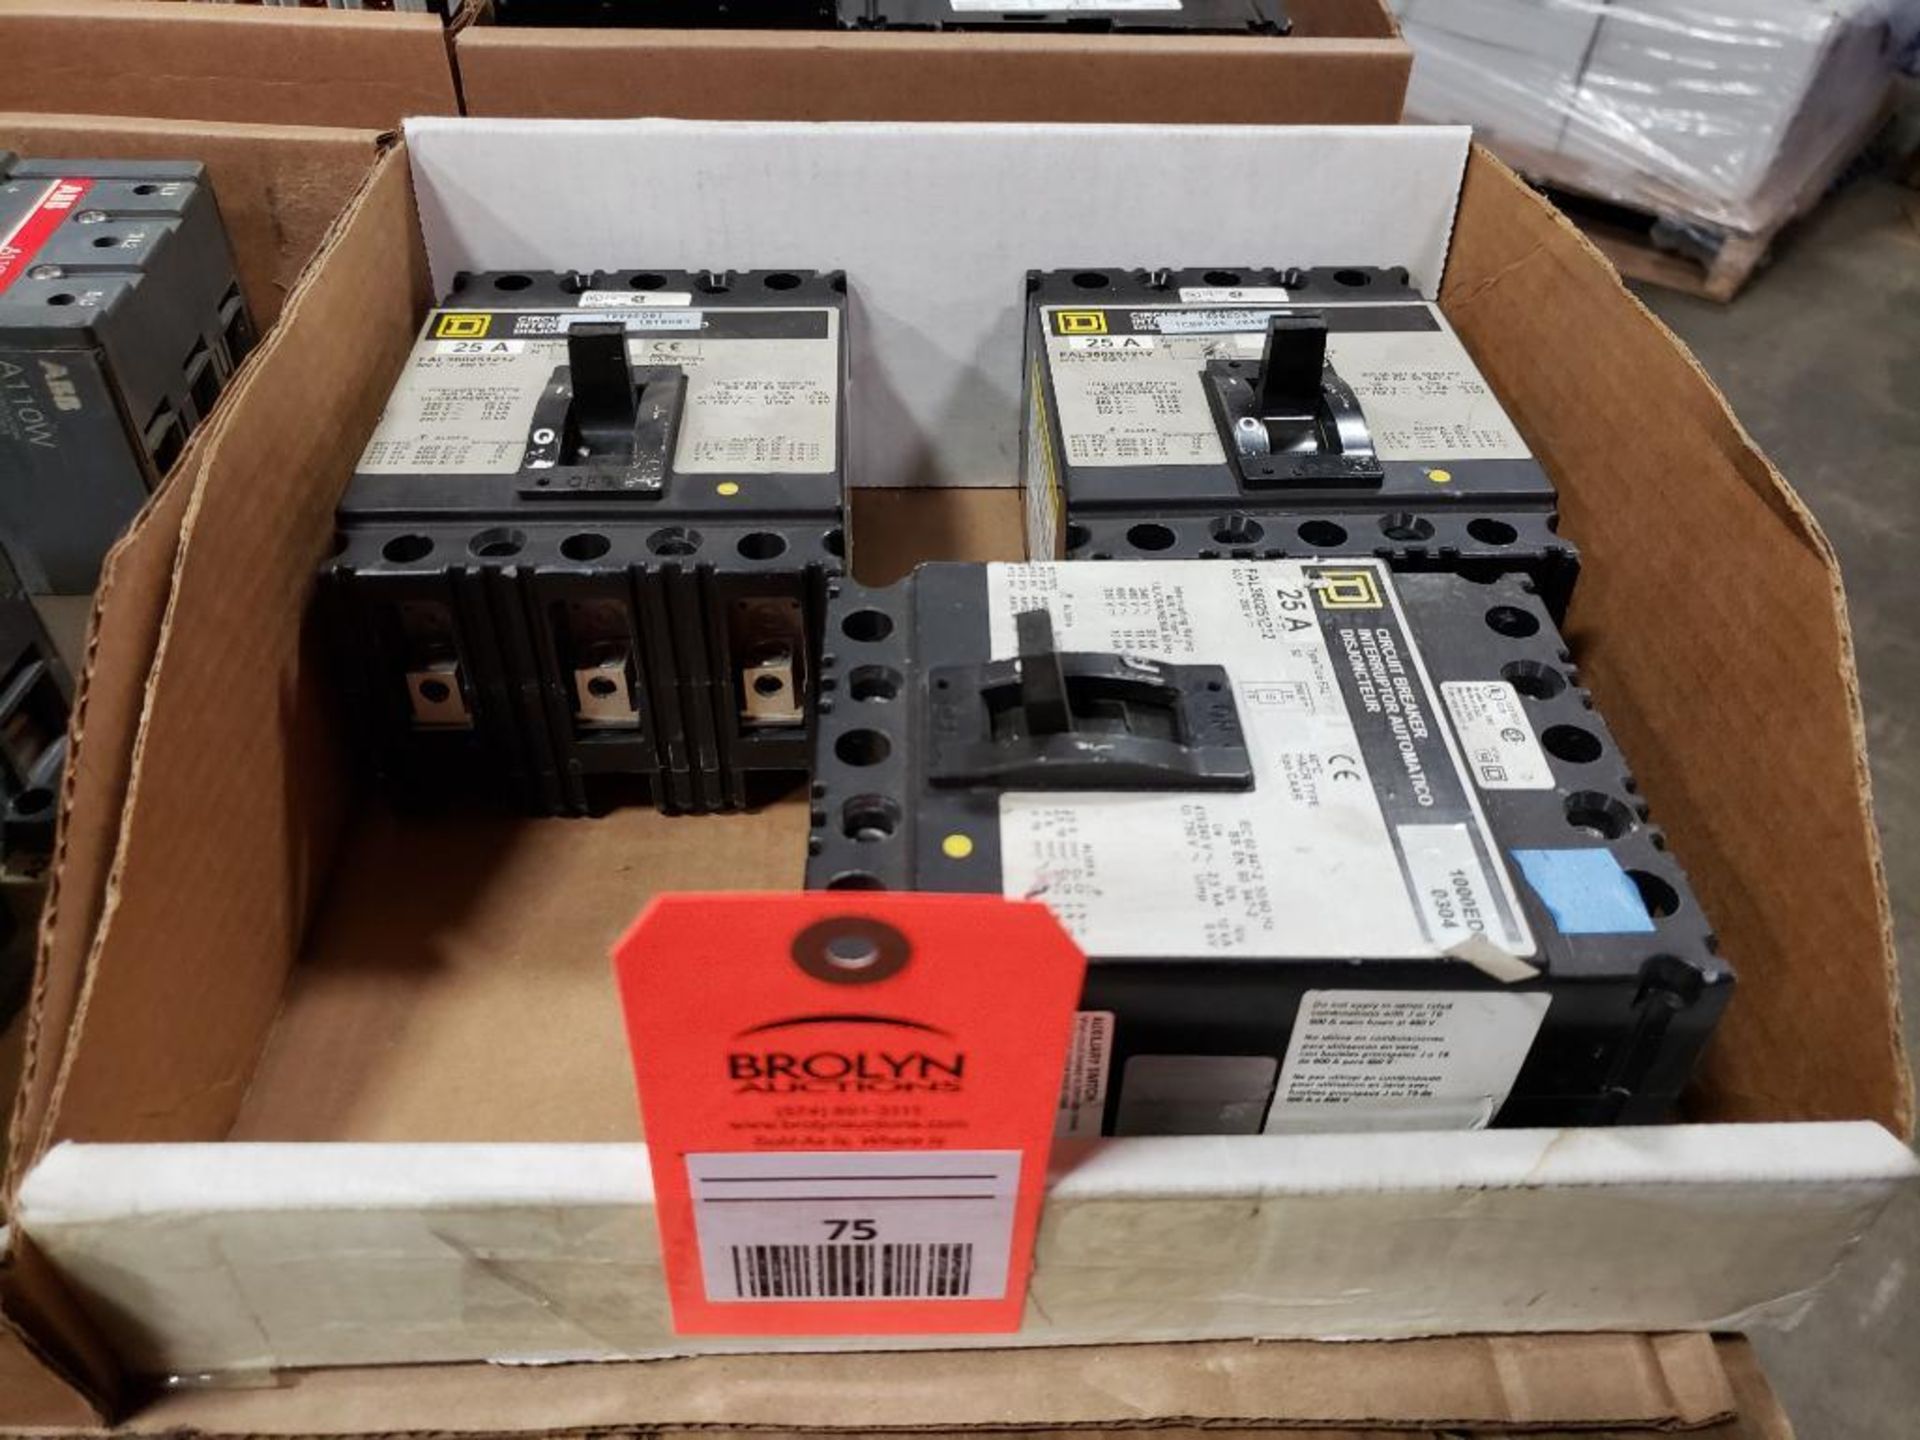 Qty 3 - Assorted Square-D molded case circuit breakers.